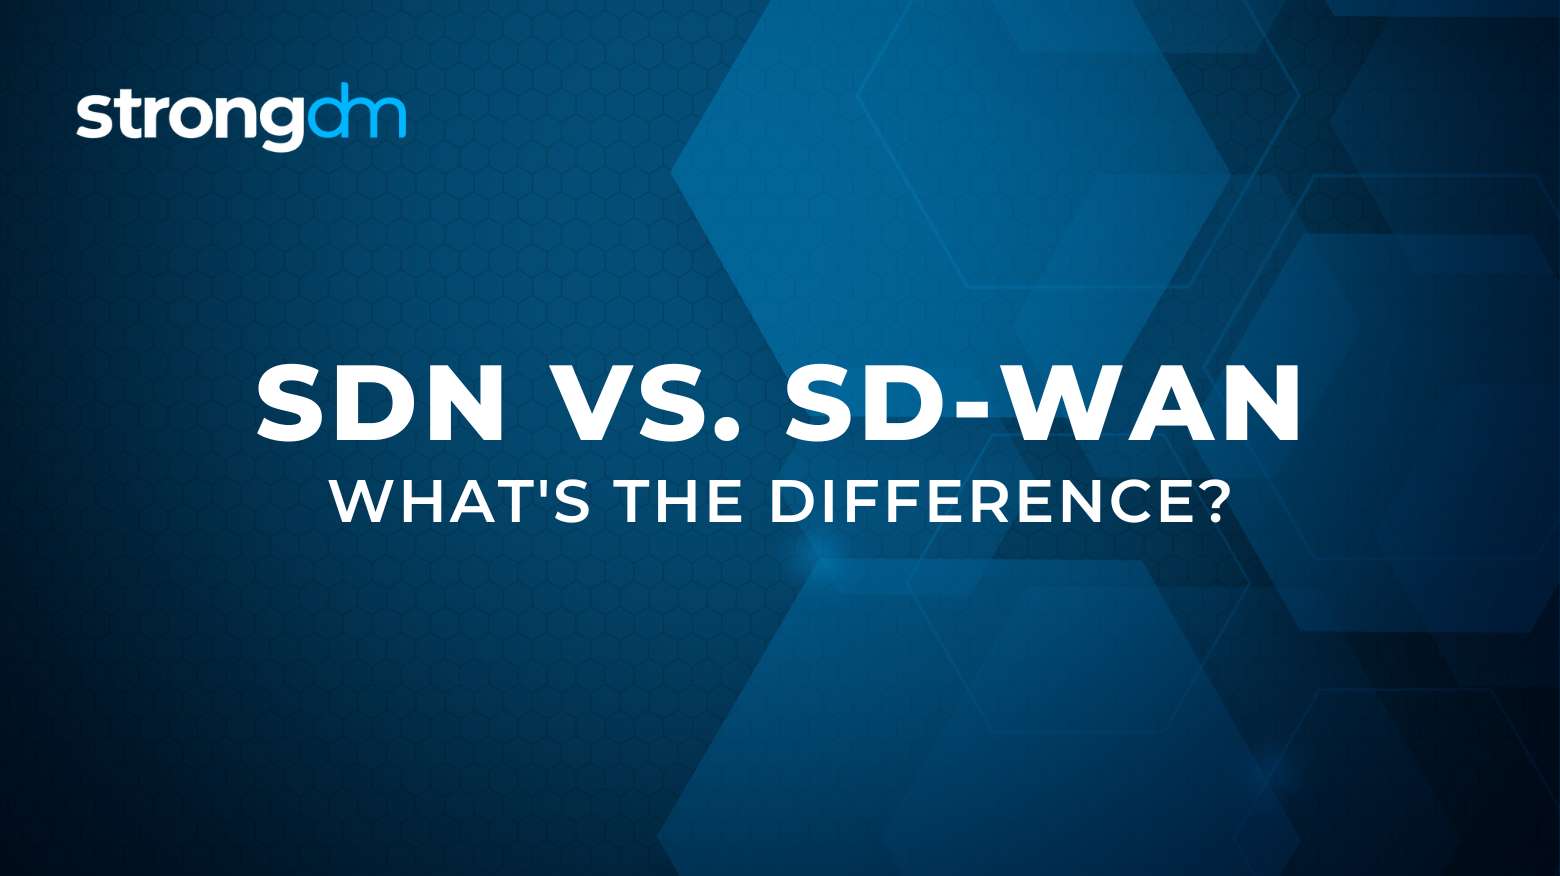 Comparing SDN and SD-WAN: What's the Difference?